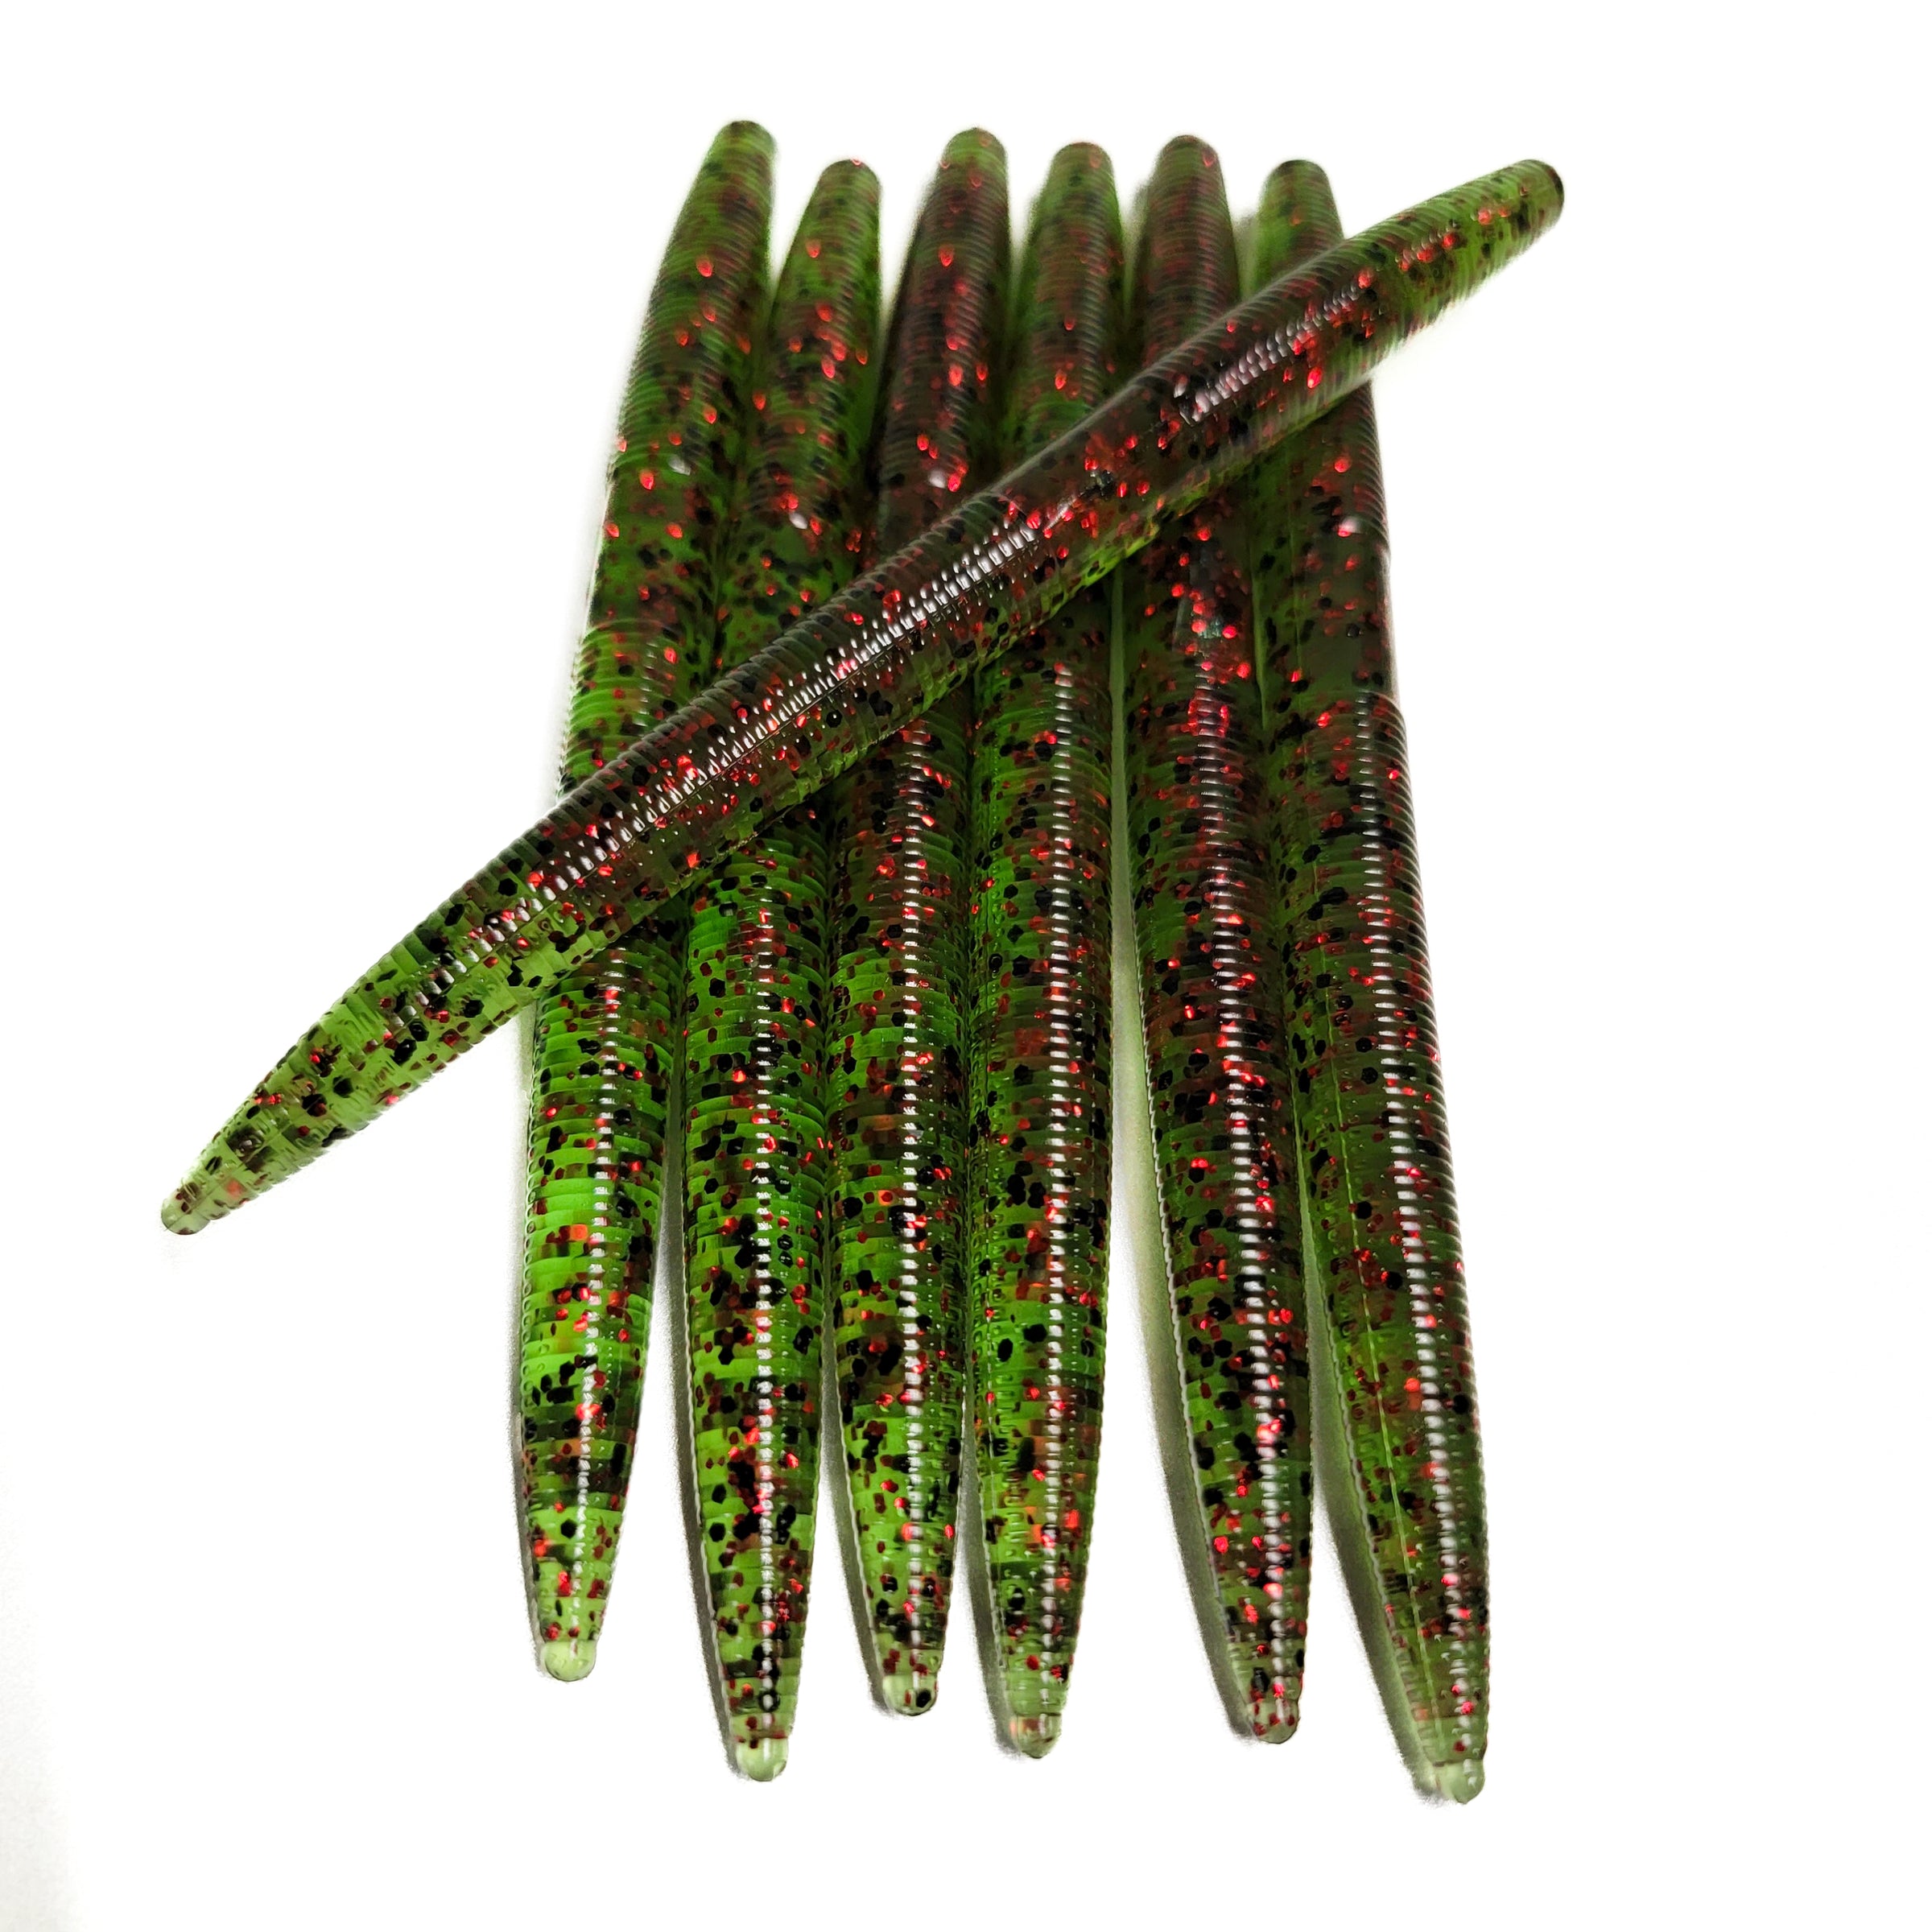 YUM Dinger Fishing Lure Soft bait Worm Camo 5 in